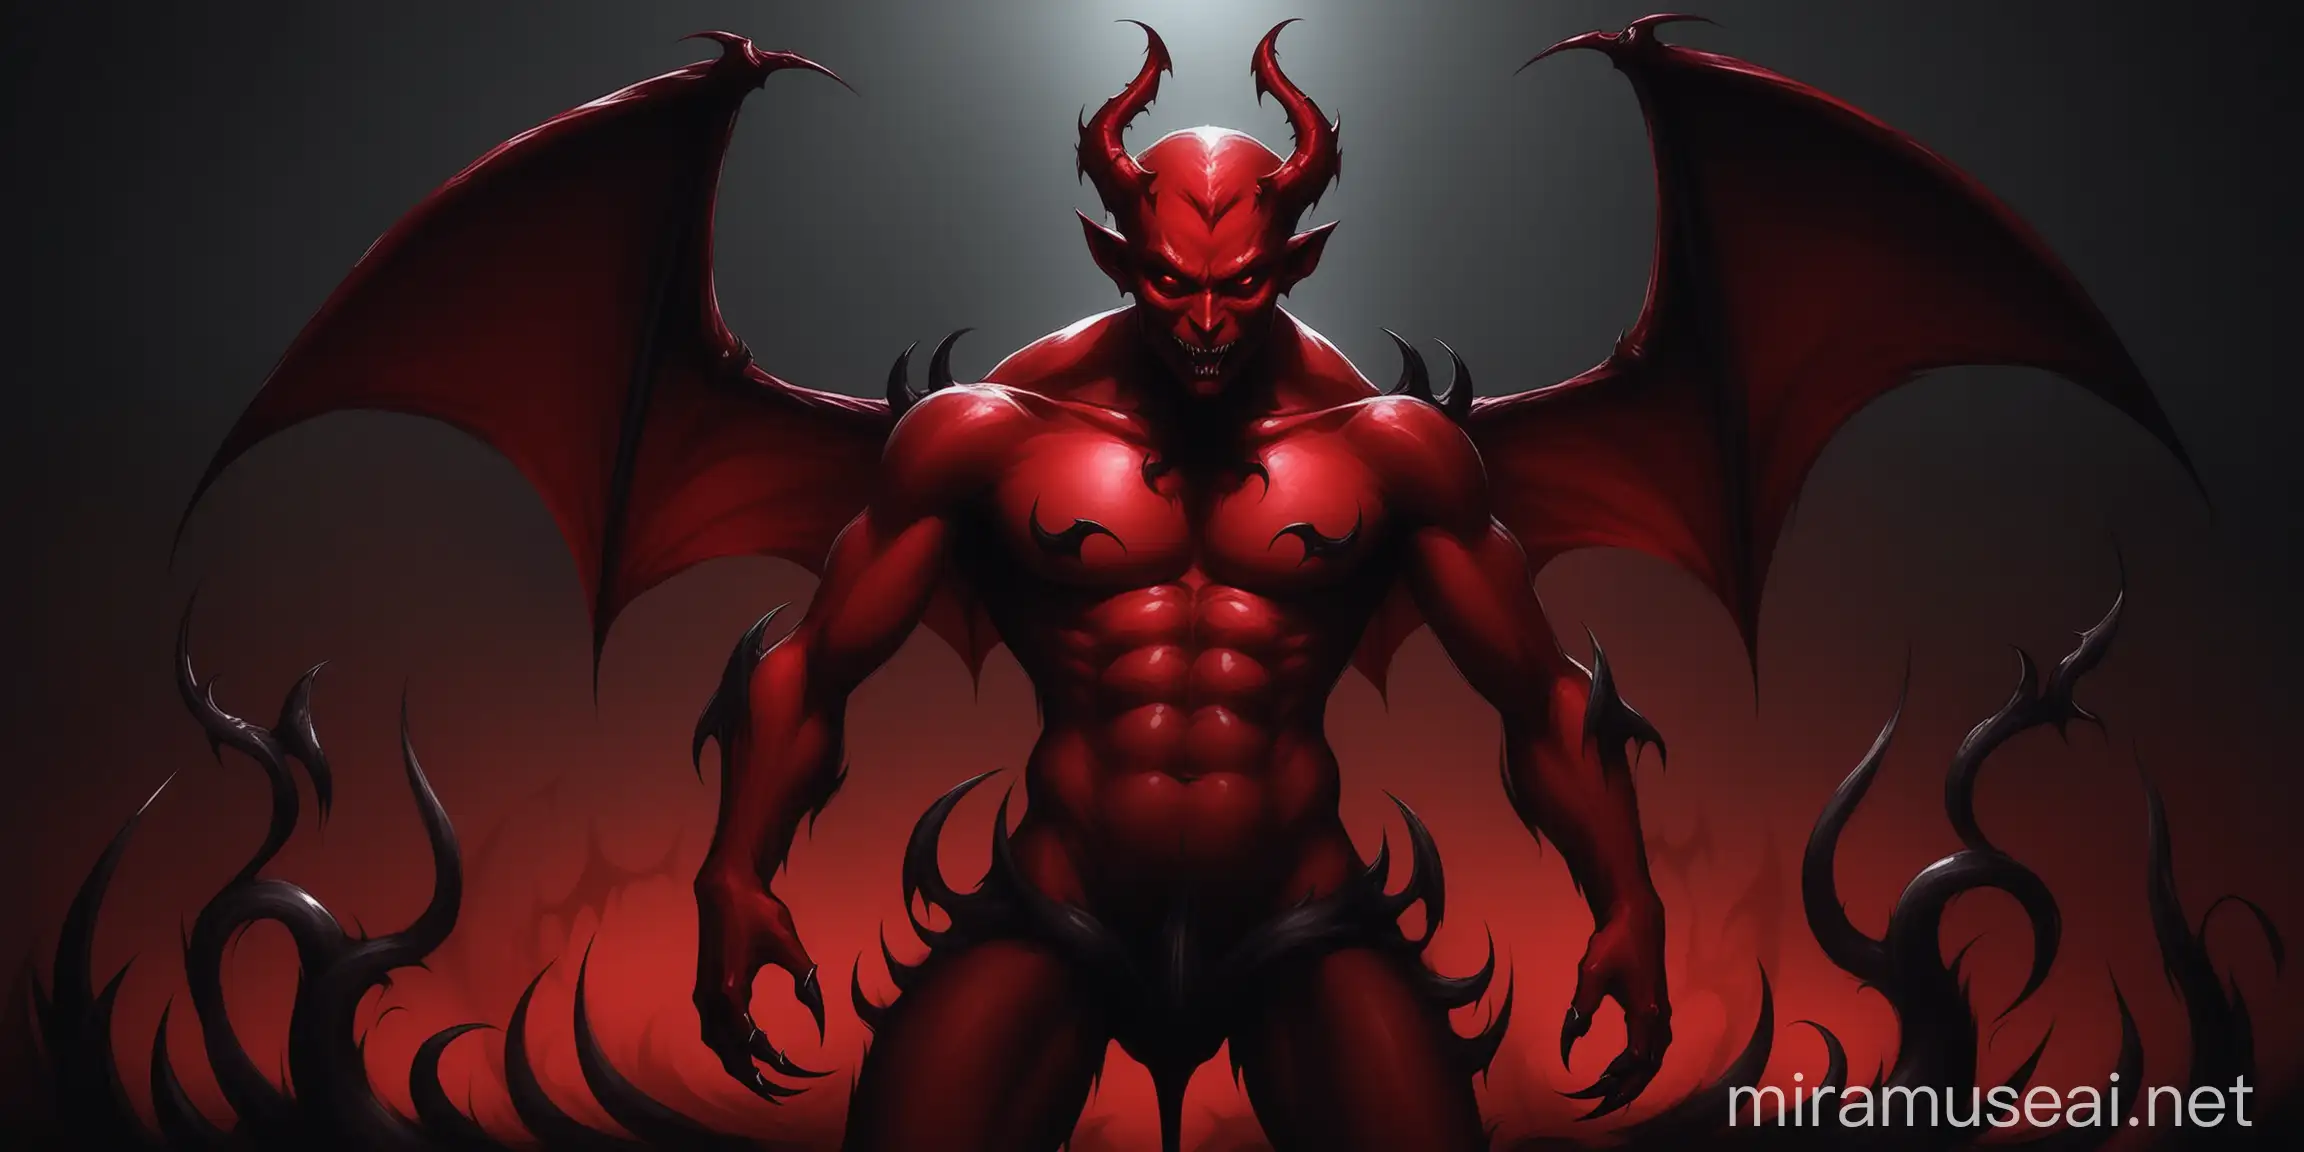 Sinister HumanDevil Hybrid in Fiery Red and Shadowy Darkness